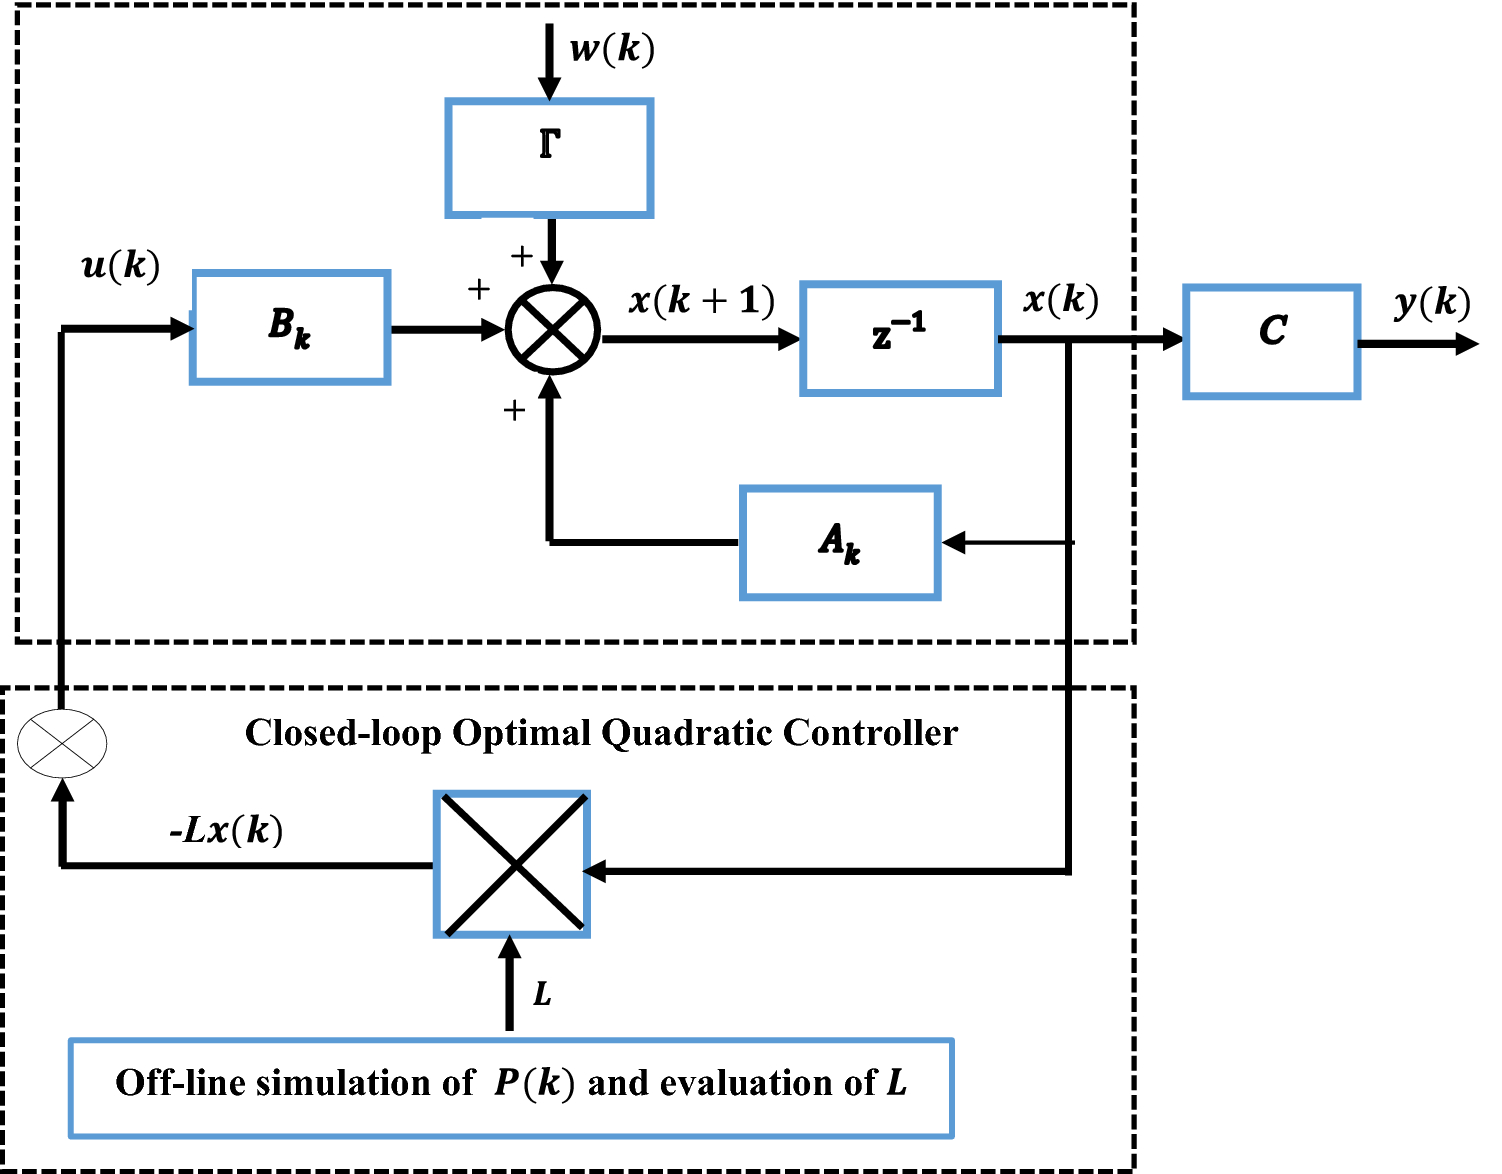 Discrete optimal quadratic AGC based cost functional minimization for  interconnected power systems